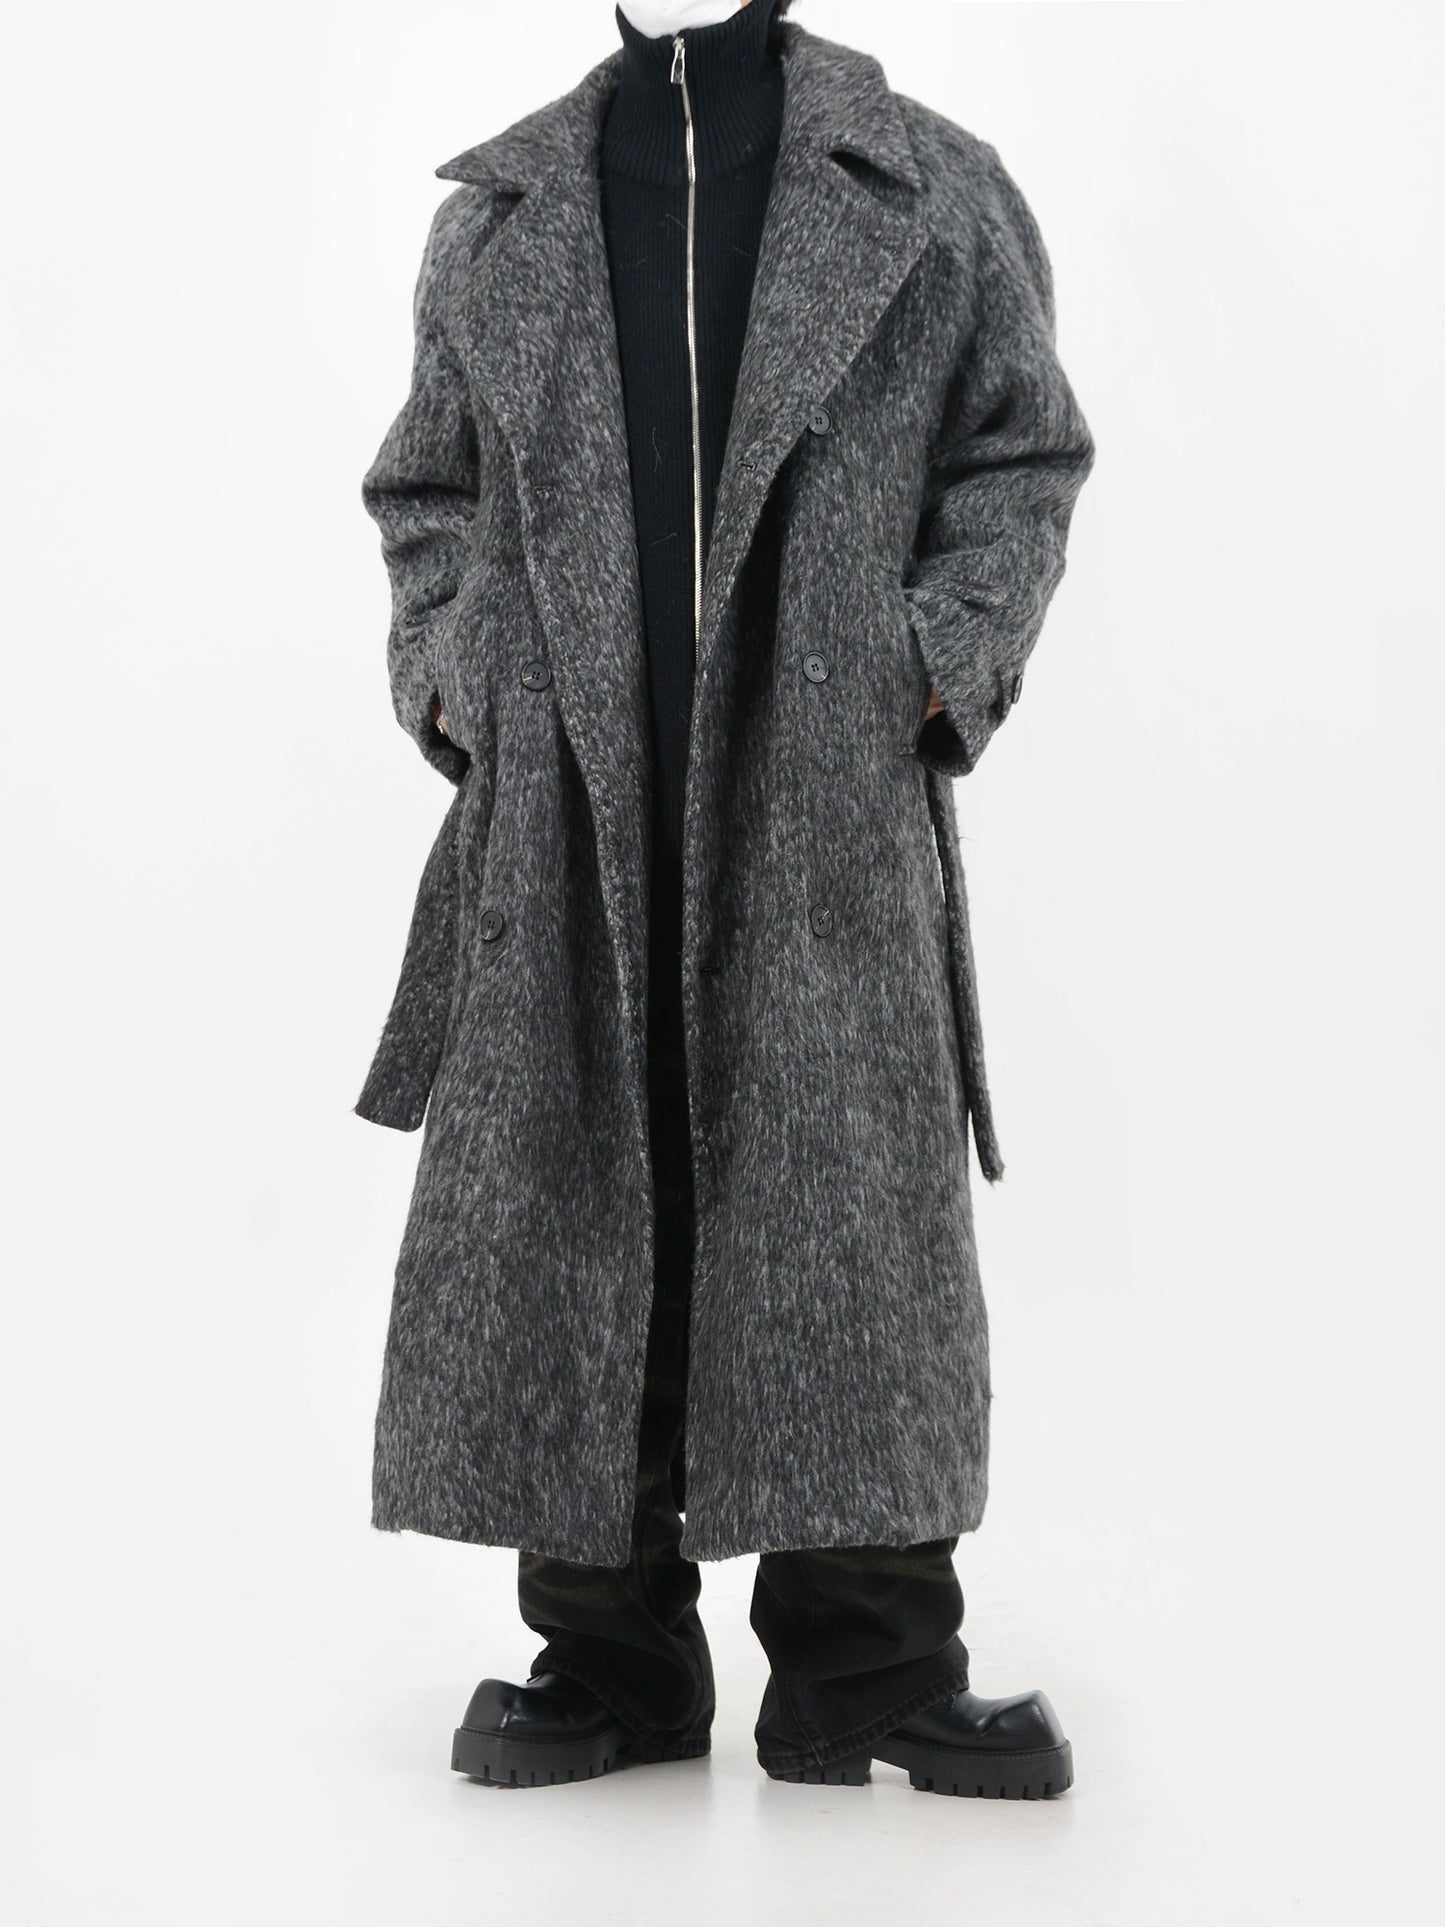 LUCE GARMENT is a deconstructed woolen coat jacket men's thickened strappy design over-the-knee trench coat